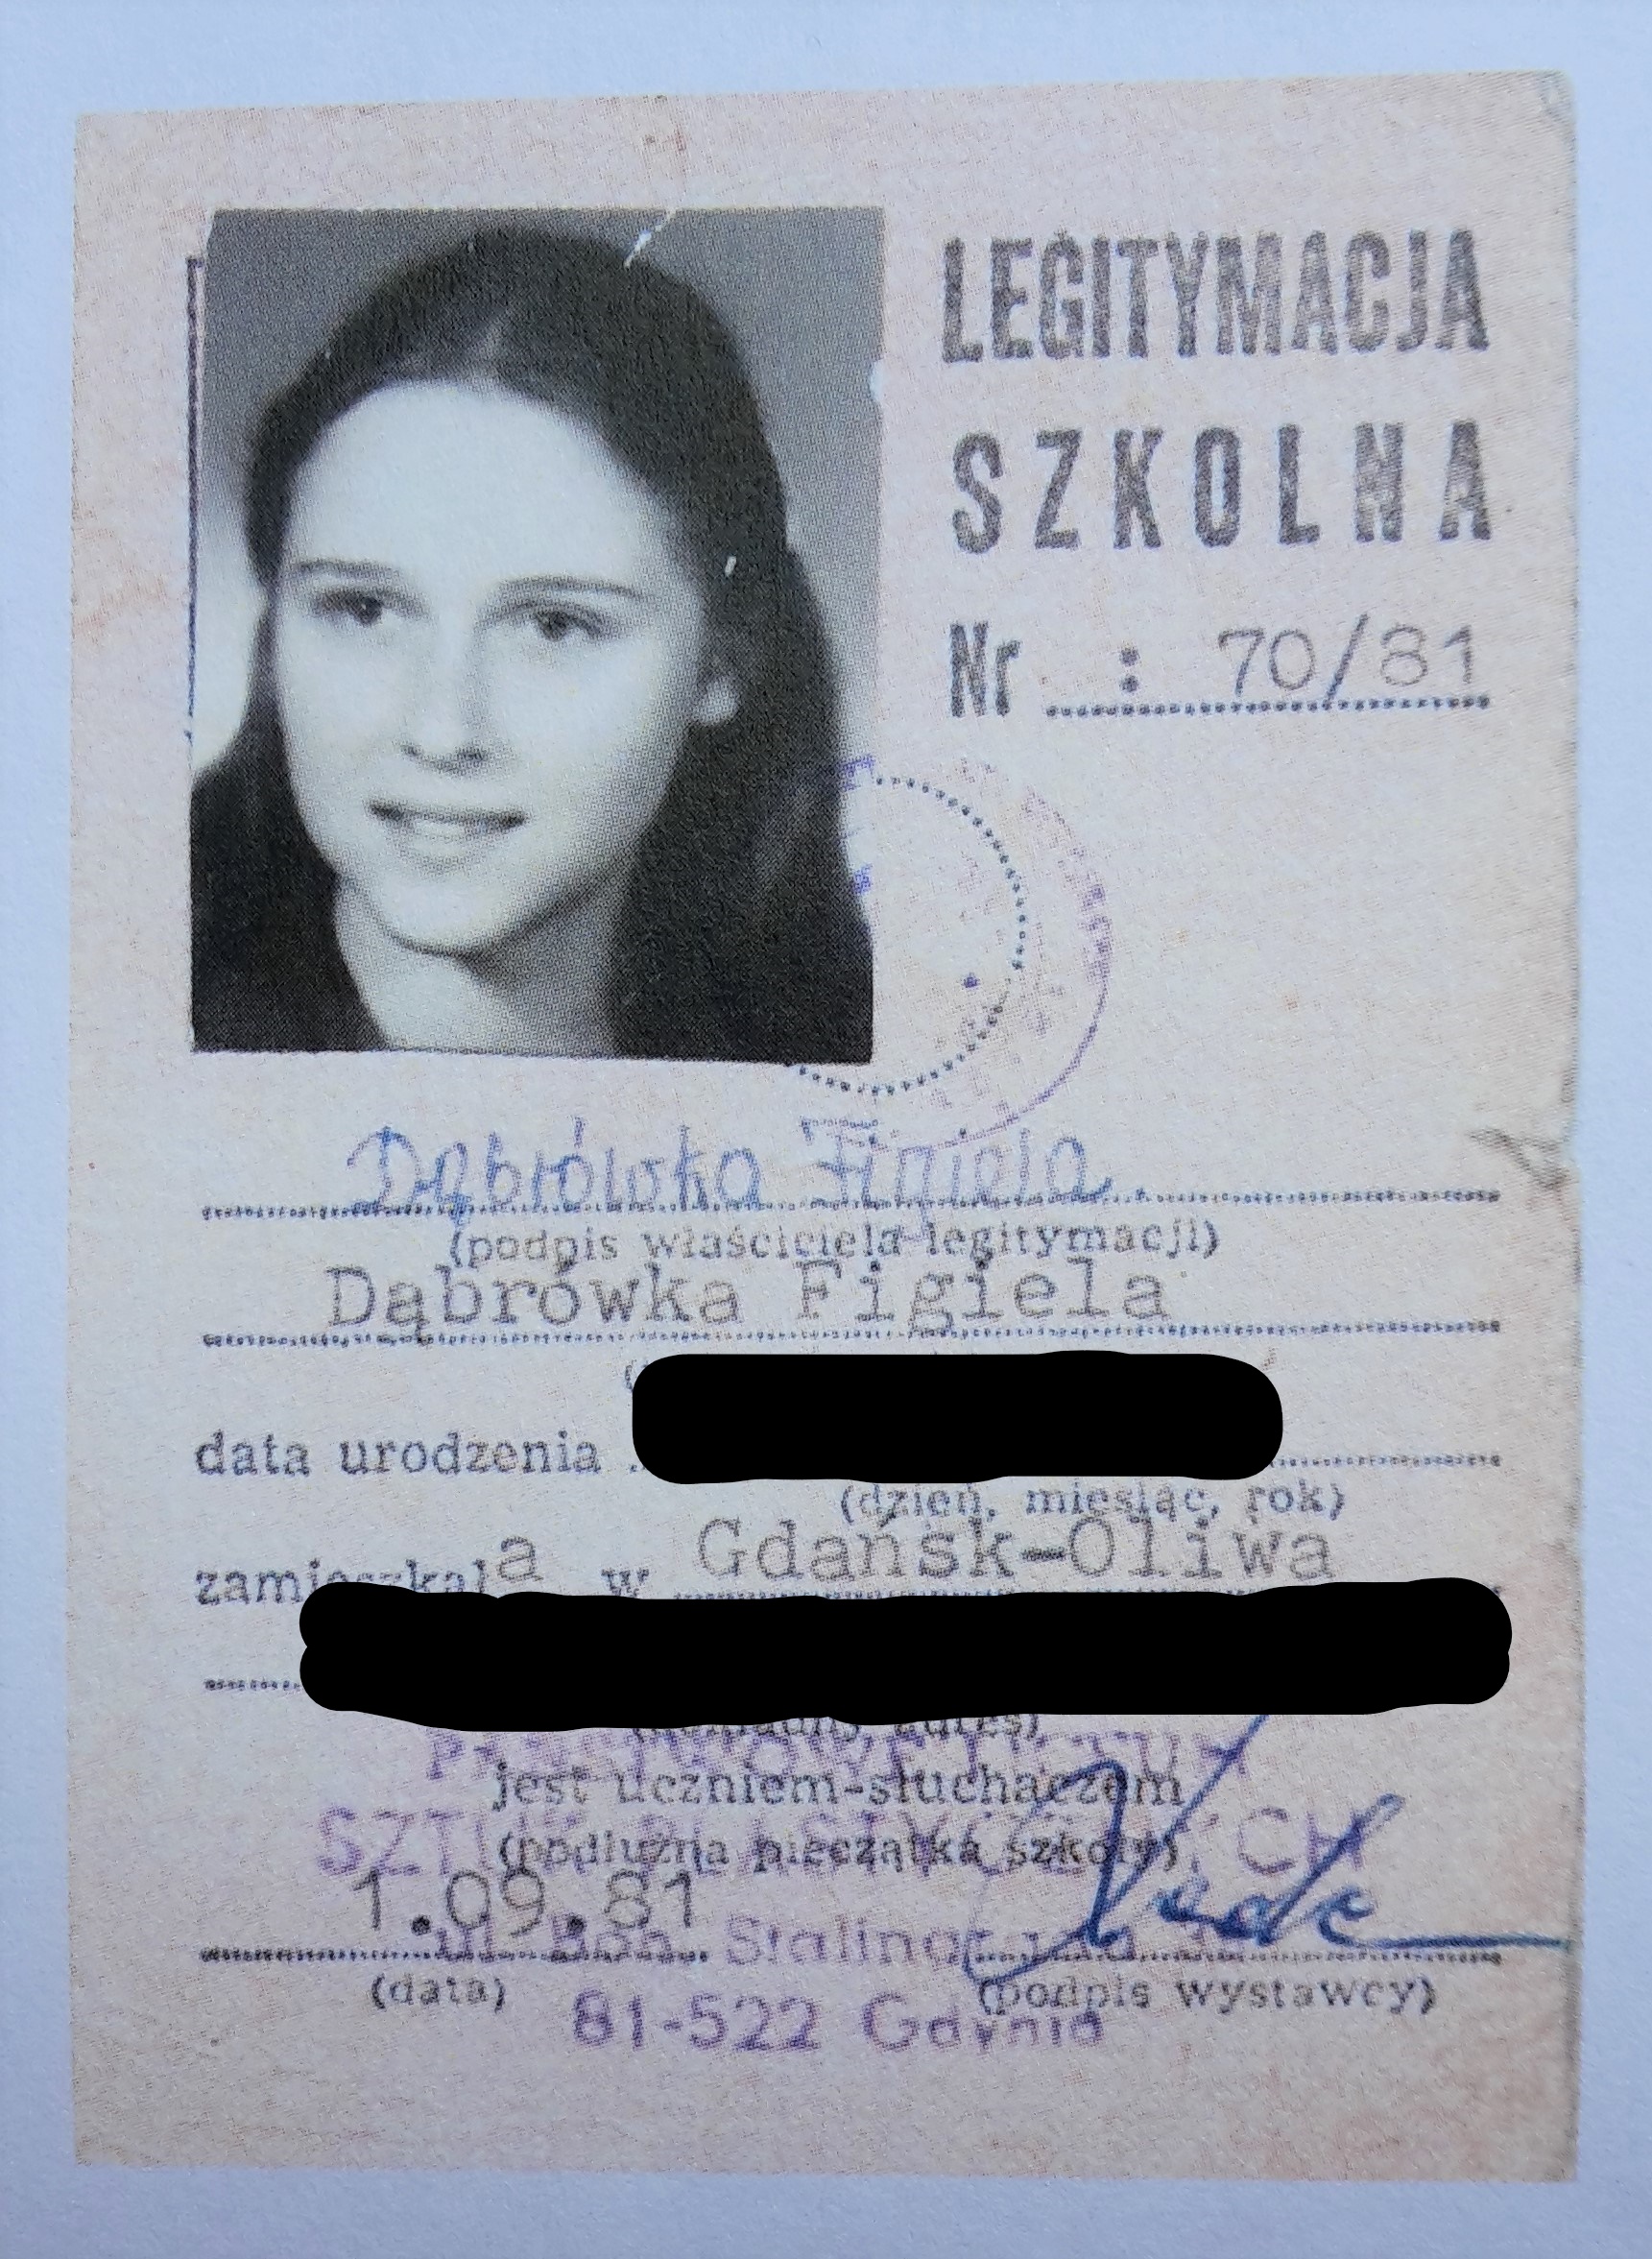 Dąbrówka Figiela-Miadziółko's student ID from the time she created the underground postage stamps during the Gdansk Strikes of August 1980.